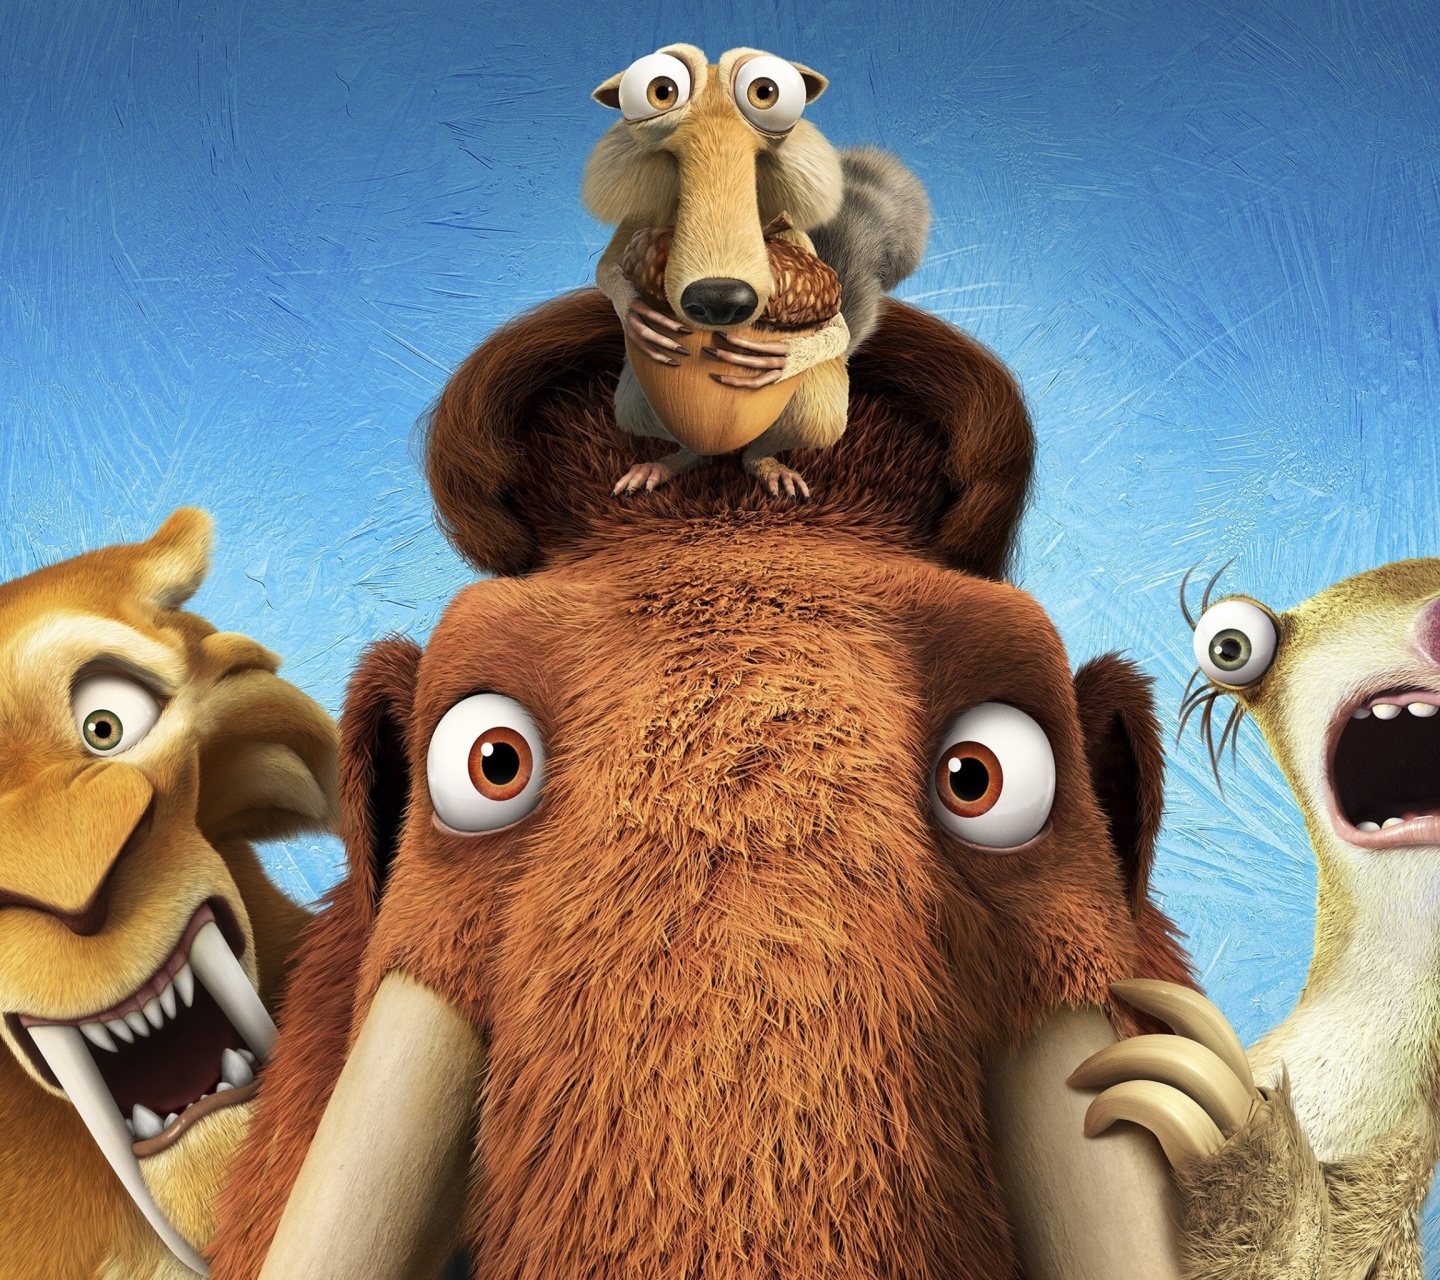 Das Ice Age 5 Collision Course with Diego, Manny, Scrat, Sid, Mammoths Wallpaper 1440x1280